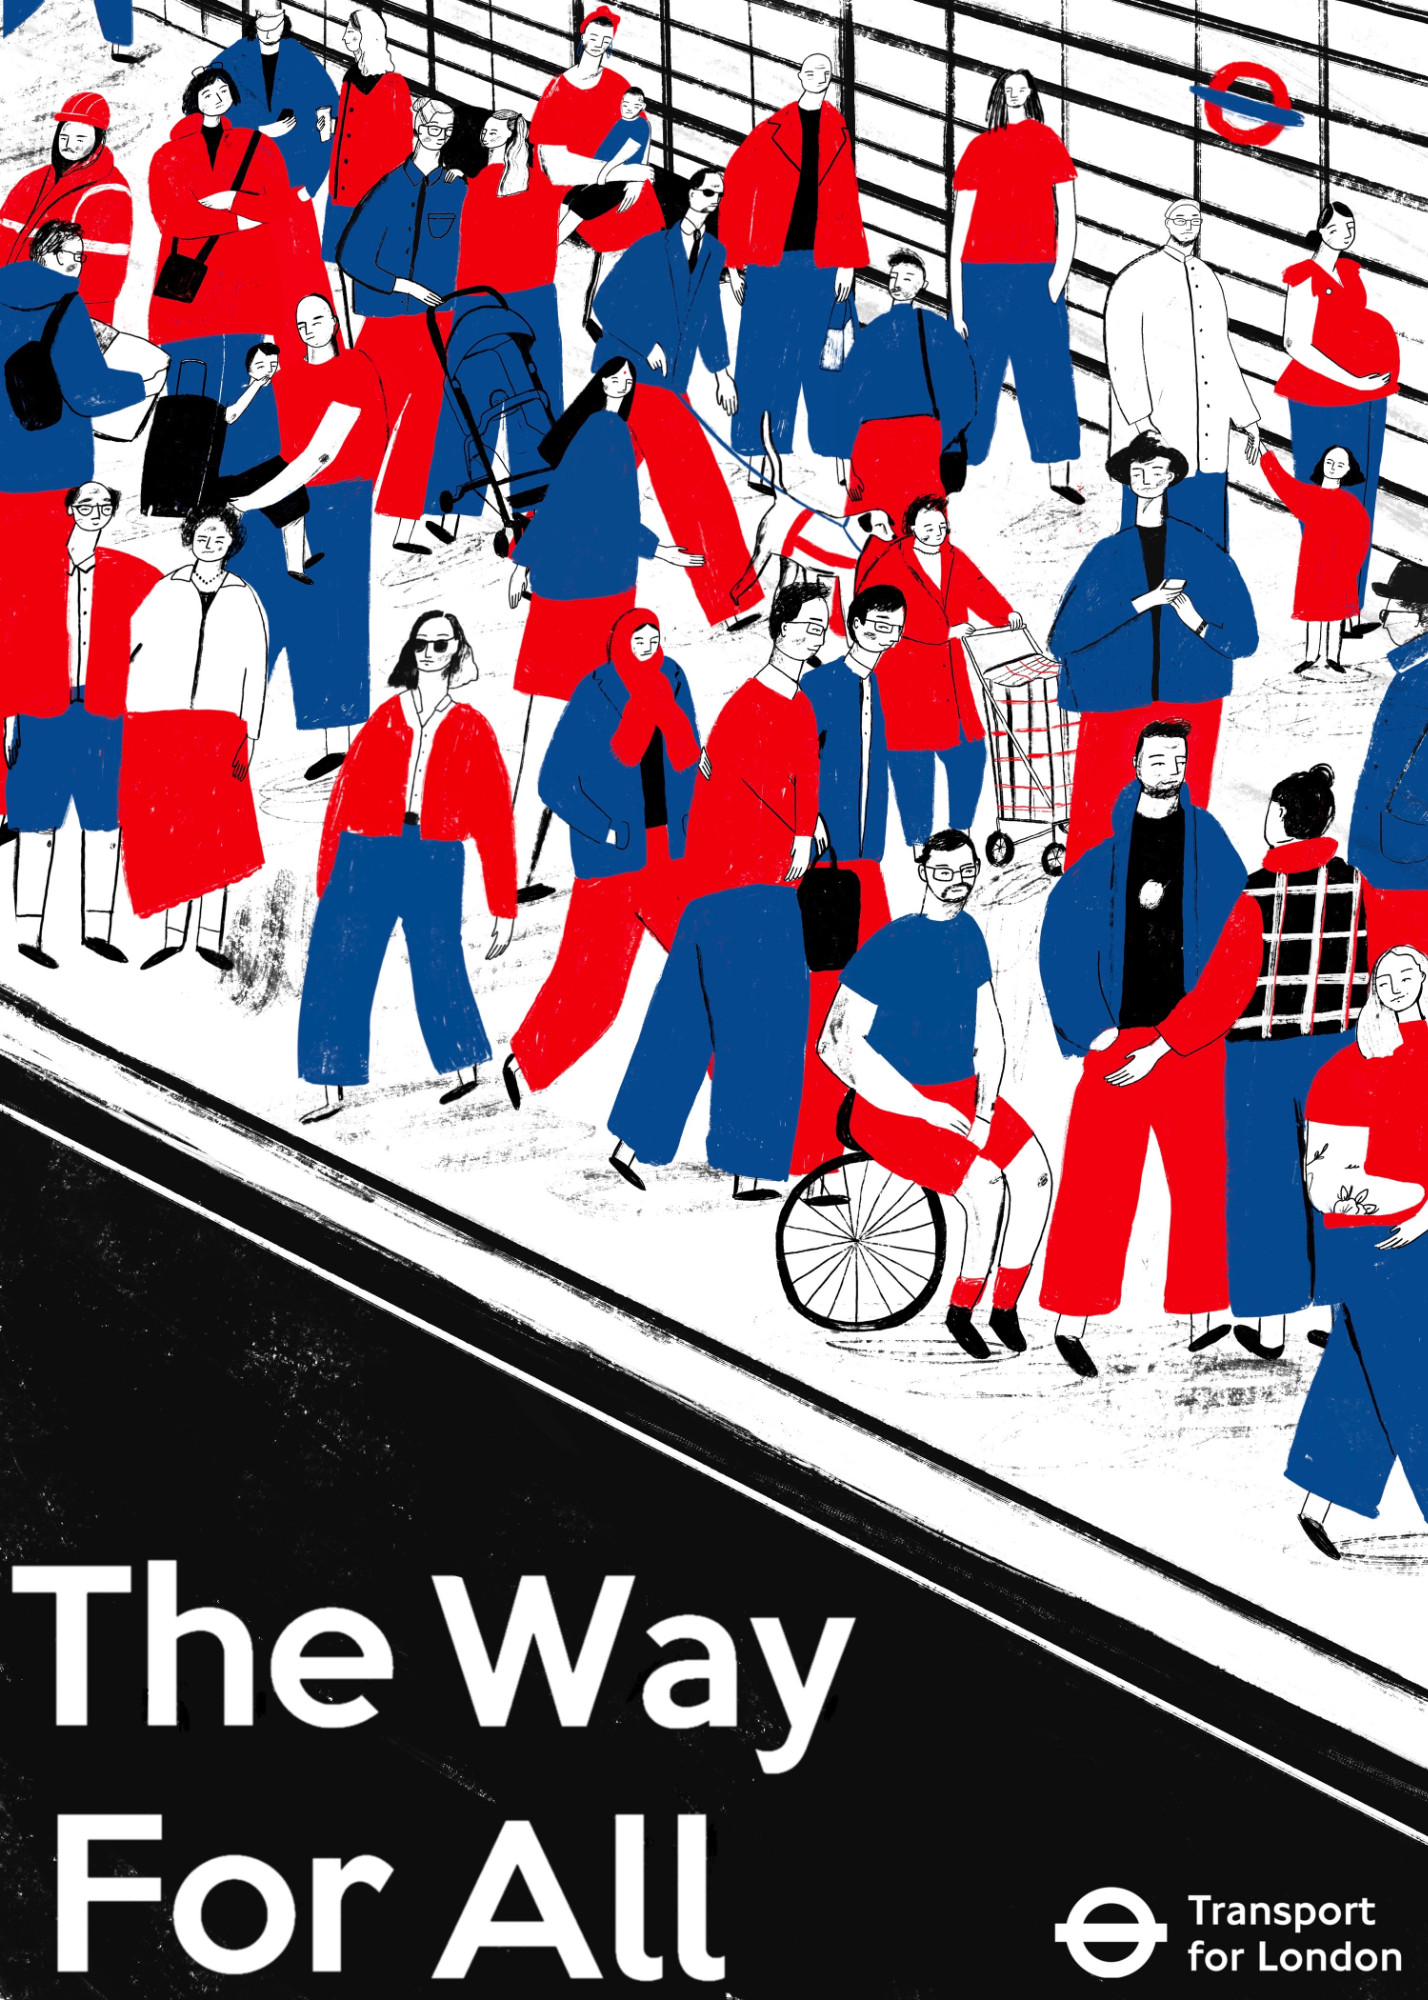 "The Way For All". Self-initiated diverse Tube poster for Transport for London. To be used within the Underground to signify the inclusivity across TFL’s transport and how they cater to all. Longlisted for the AOI’s World Illustration Awards. Lizzie Knott.